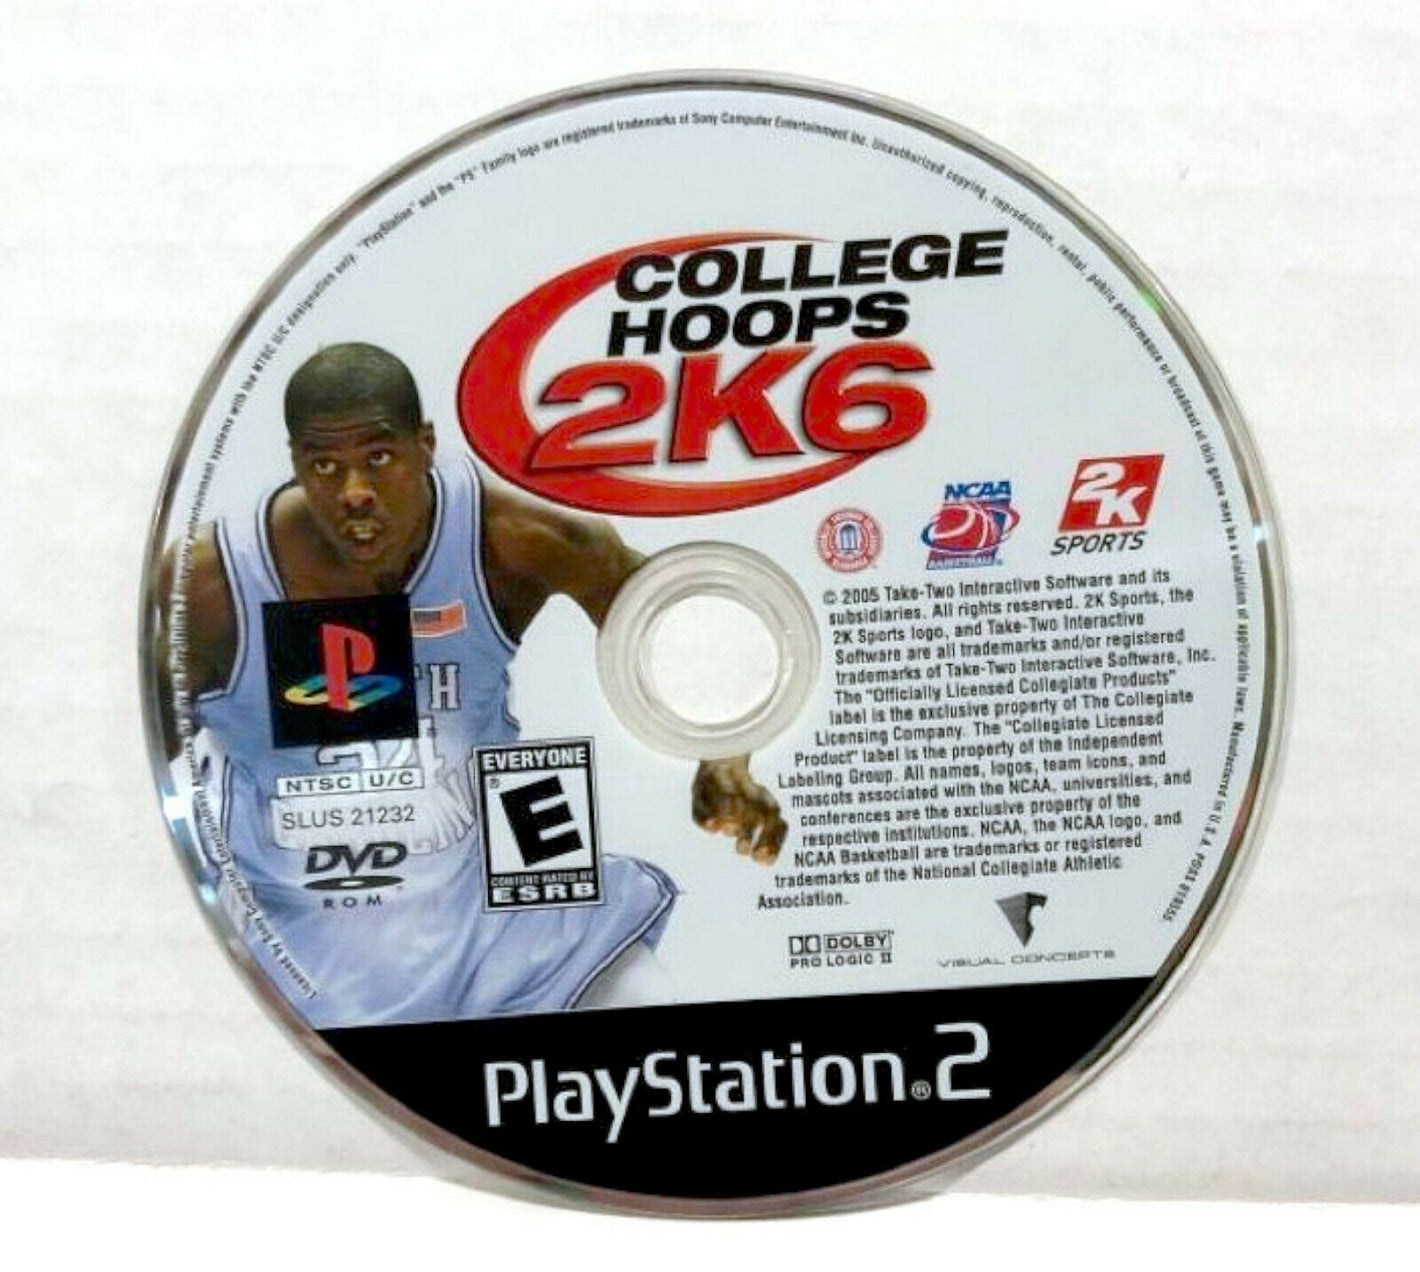 College Hoops 2K6 Sony PlayStation 2 PS2 Video Game DISC ONLY Basketball 2006 [Used/Refurbished]